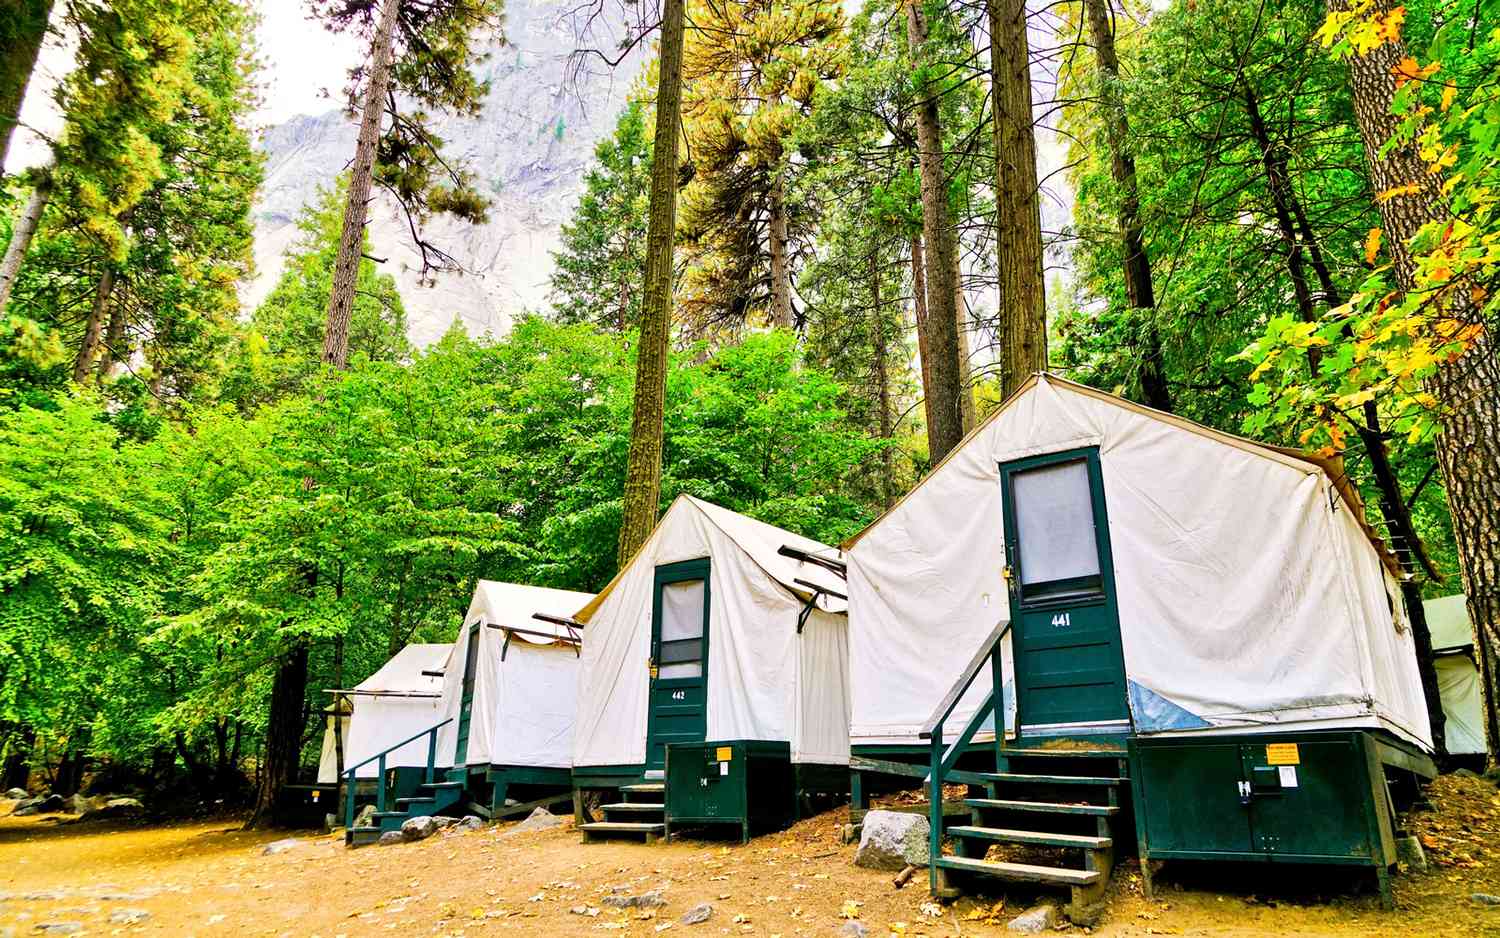 Plan Your Next Adventure in the Great Outdoors: 6 Best Campgrounds in Yosemite National Park